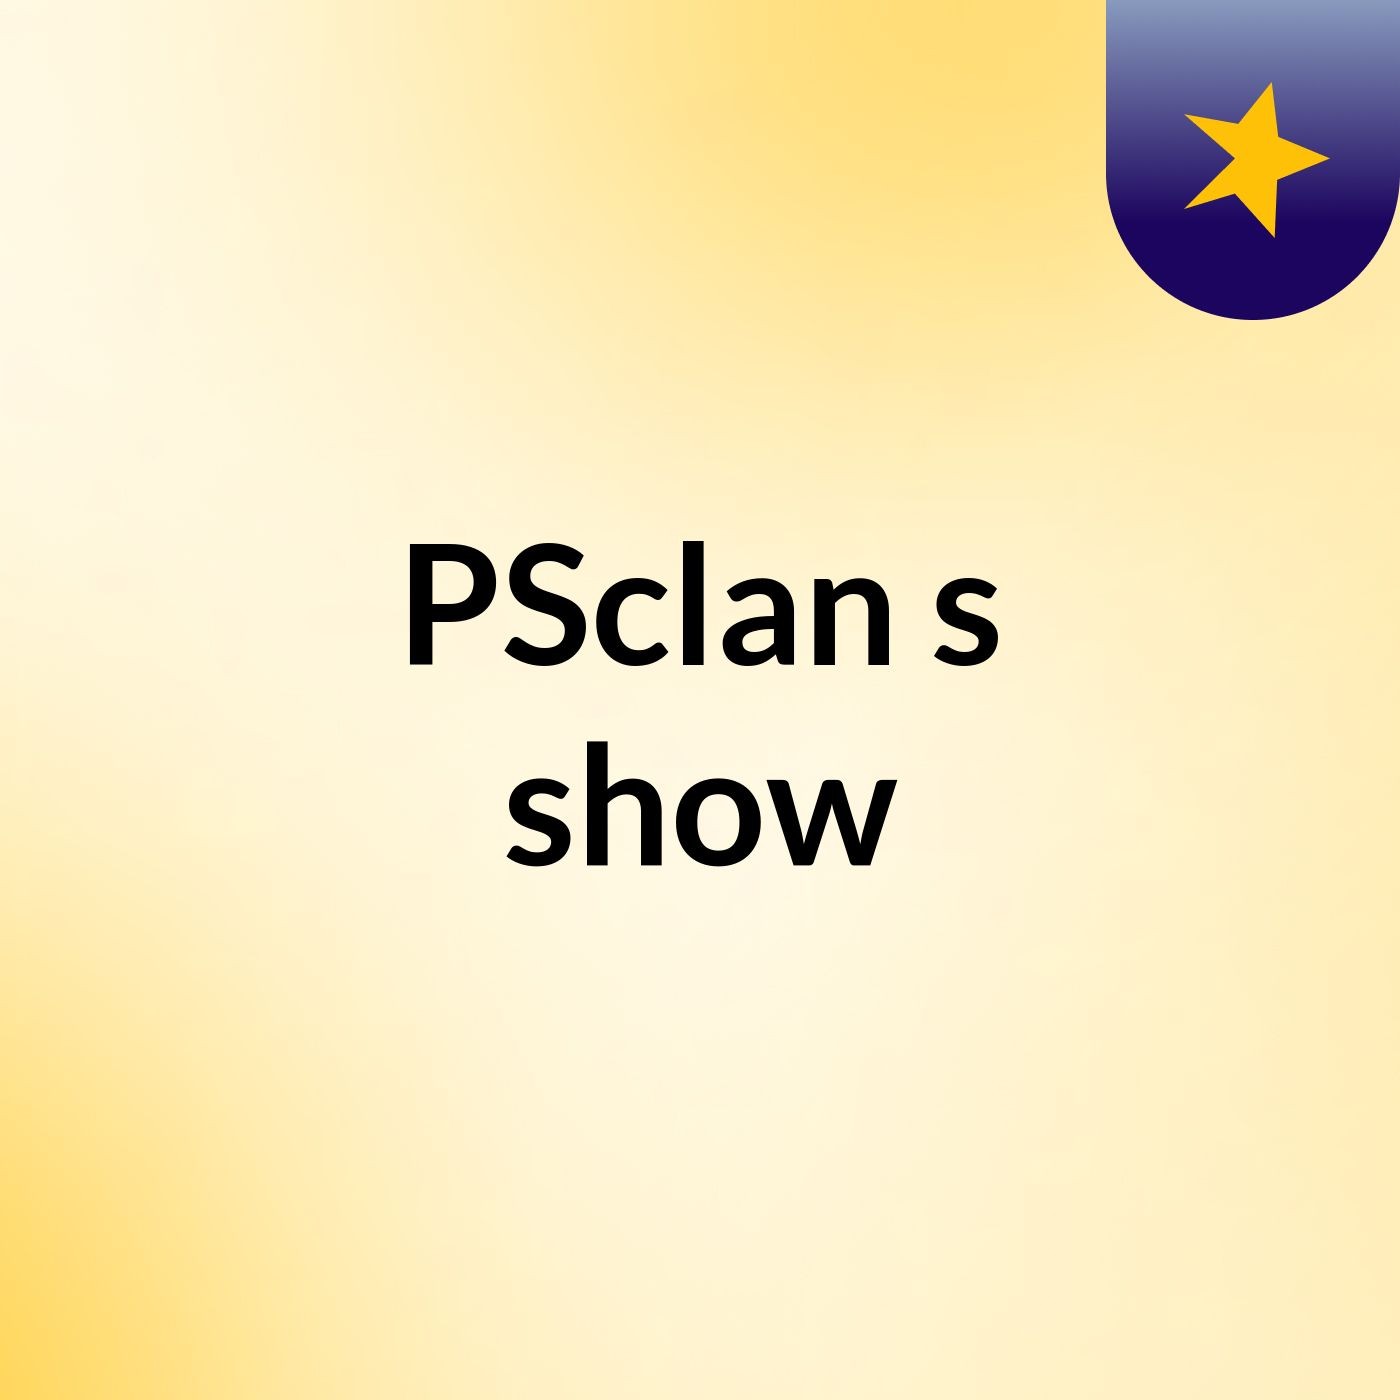 PSclan's show